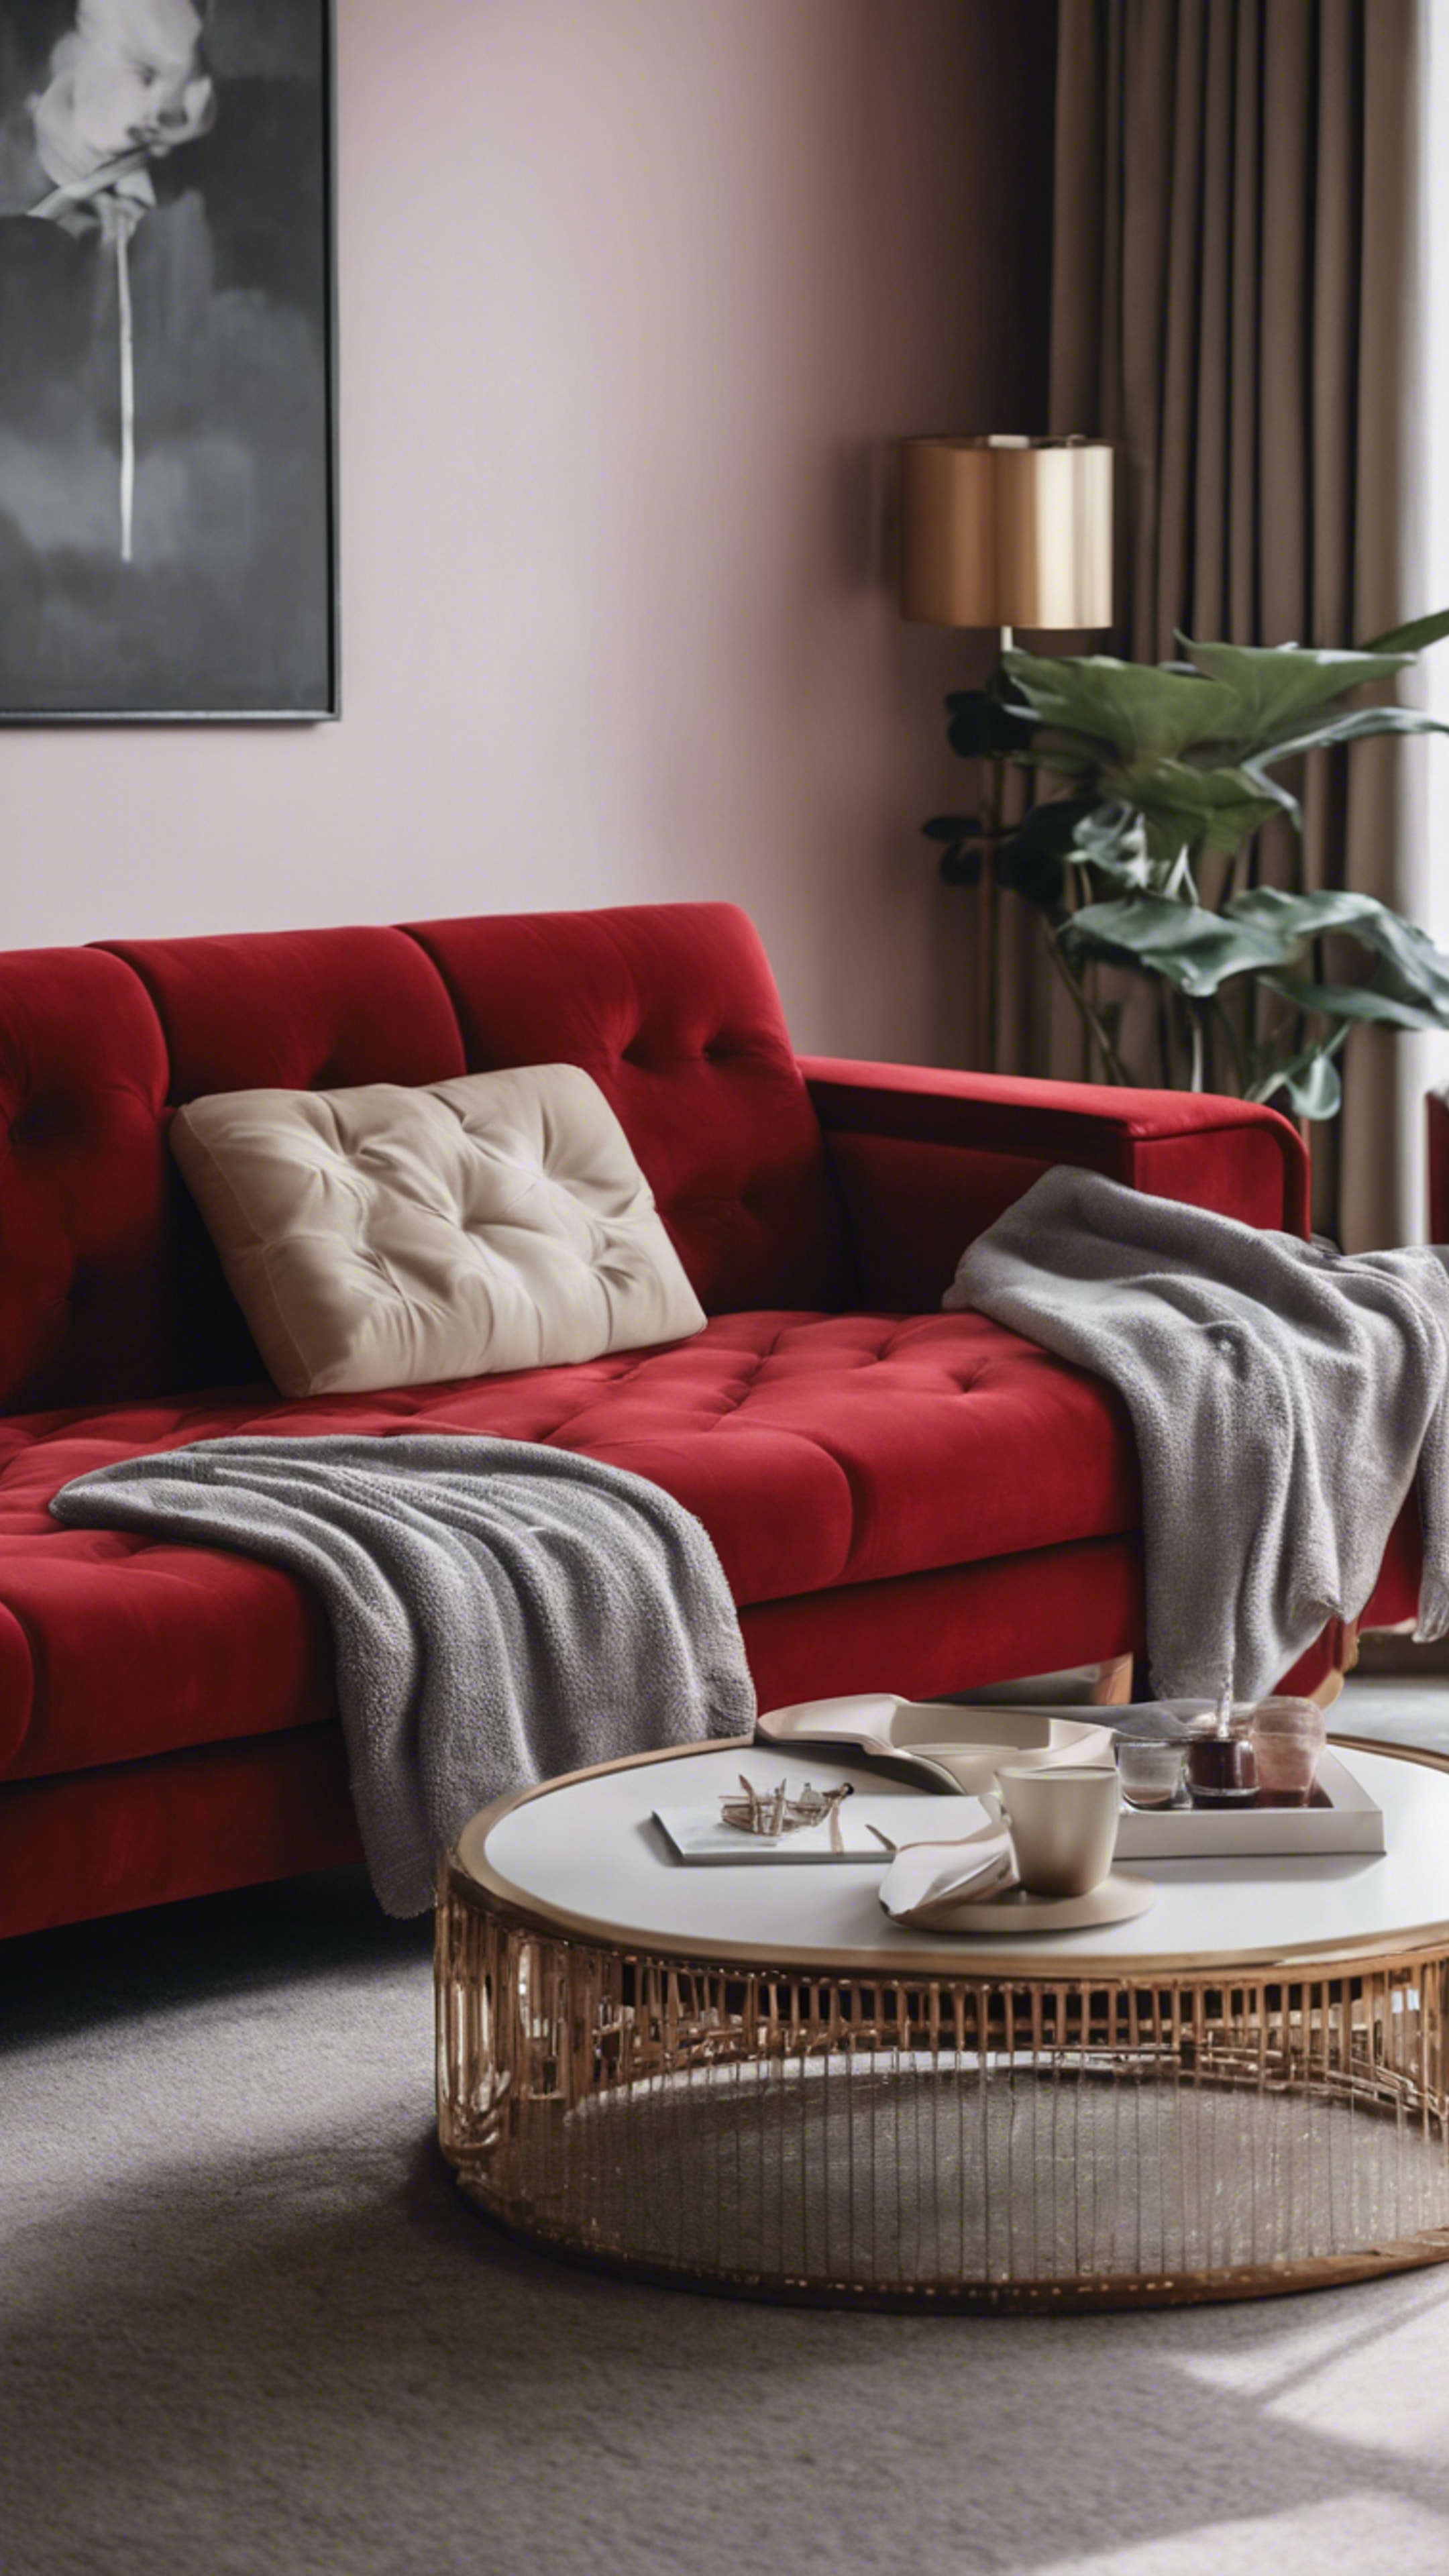 A luxurious red velvet sofa in a minimalistic modern living room, its color standing out in an otherwise neutral scene.壁紙[9f5c54c2b7d04d069b86]